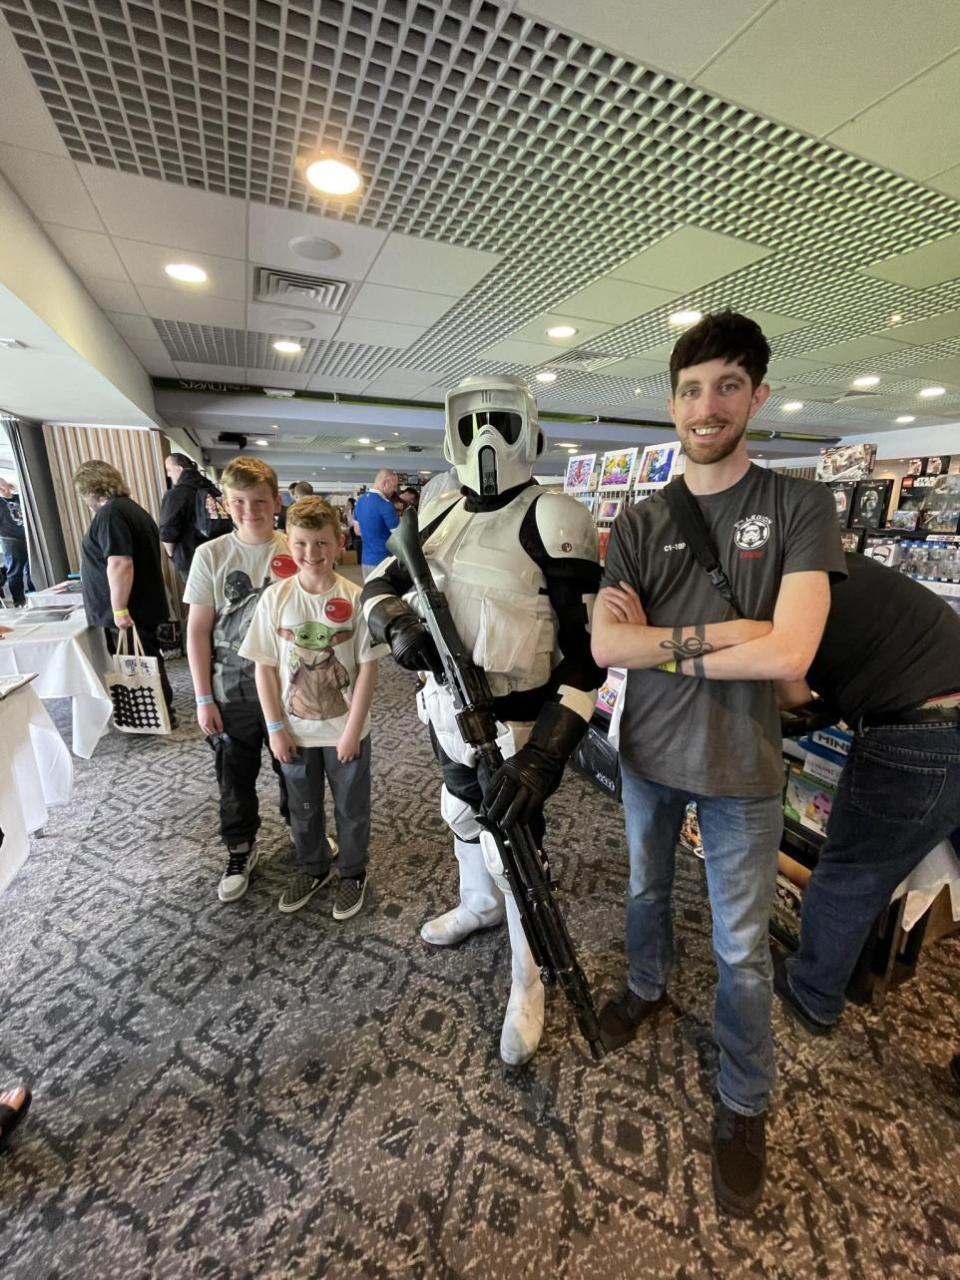 Lancashire Telegraph: John Ashton from Burnley of the Imperial Alliance as a Biker Scout Trooper, with Jack Walsh, 28, from Clayton-le-Moors, a member of the 5th Legion, and Freddie, 11, and George Copland, 8, from Haworth